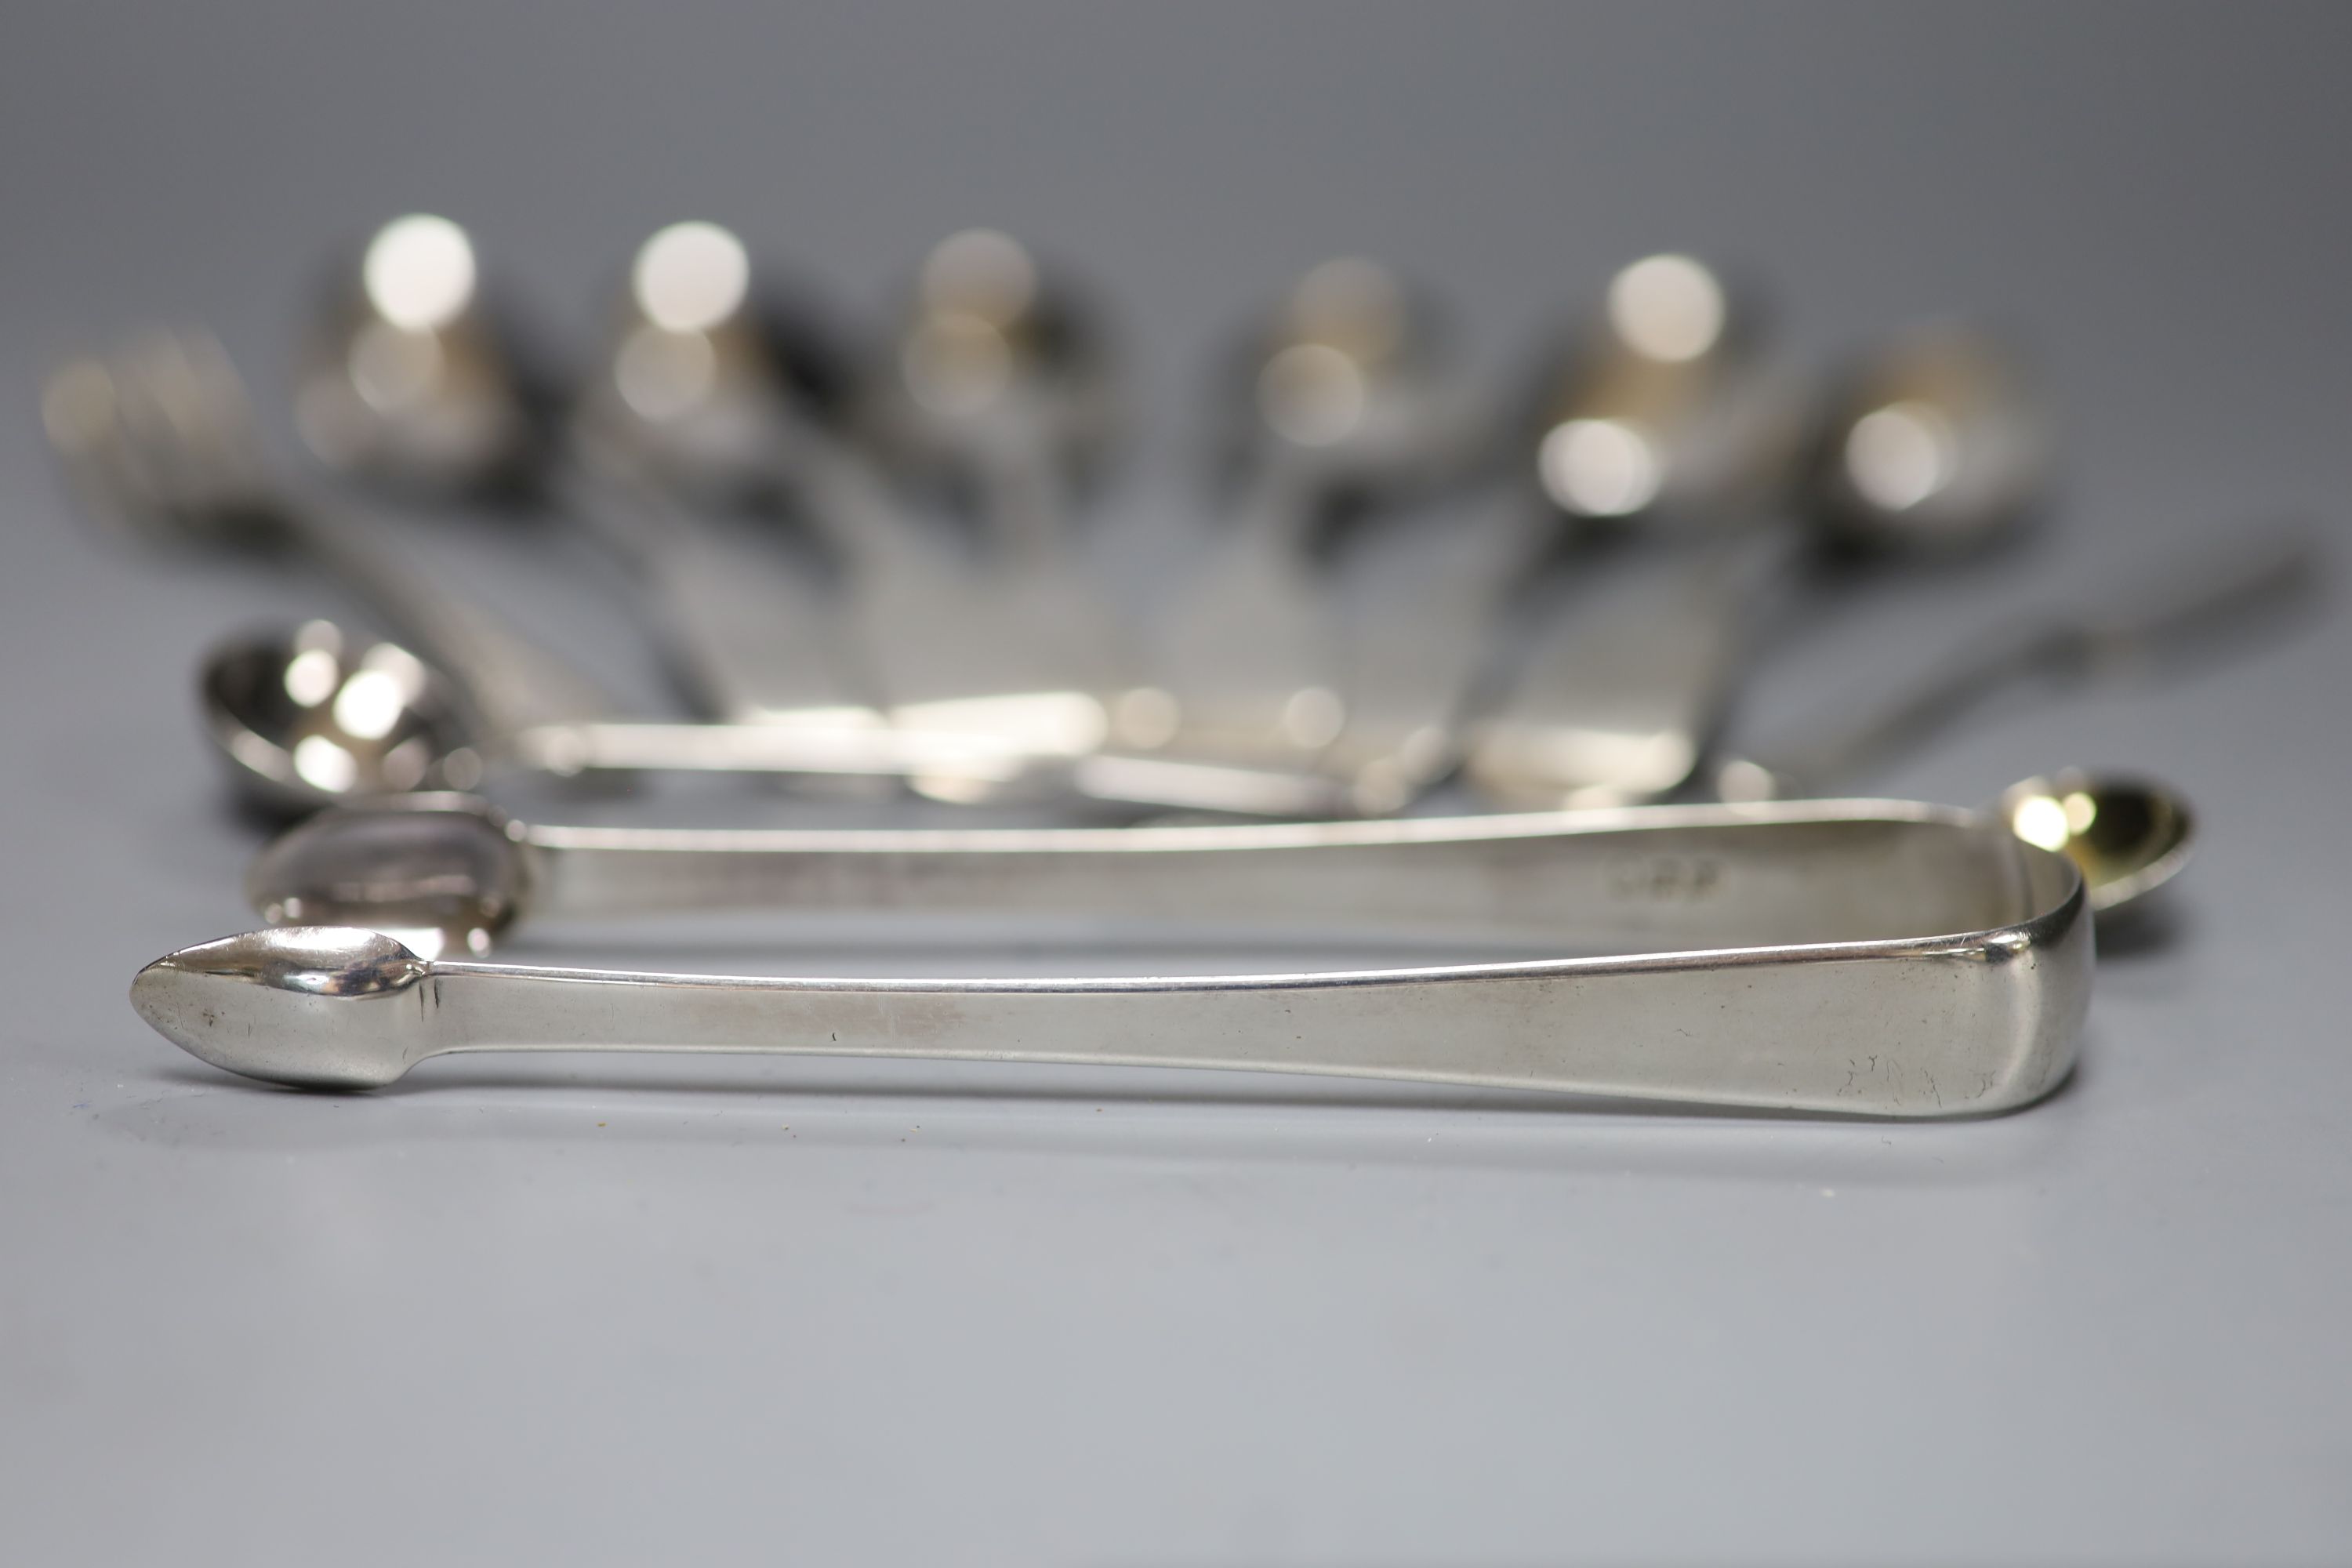 A set of six William IV Scottish silver dessert spoons, Andrew Davidson, Edinburgh, 1836 and a small group of minor silver flatware